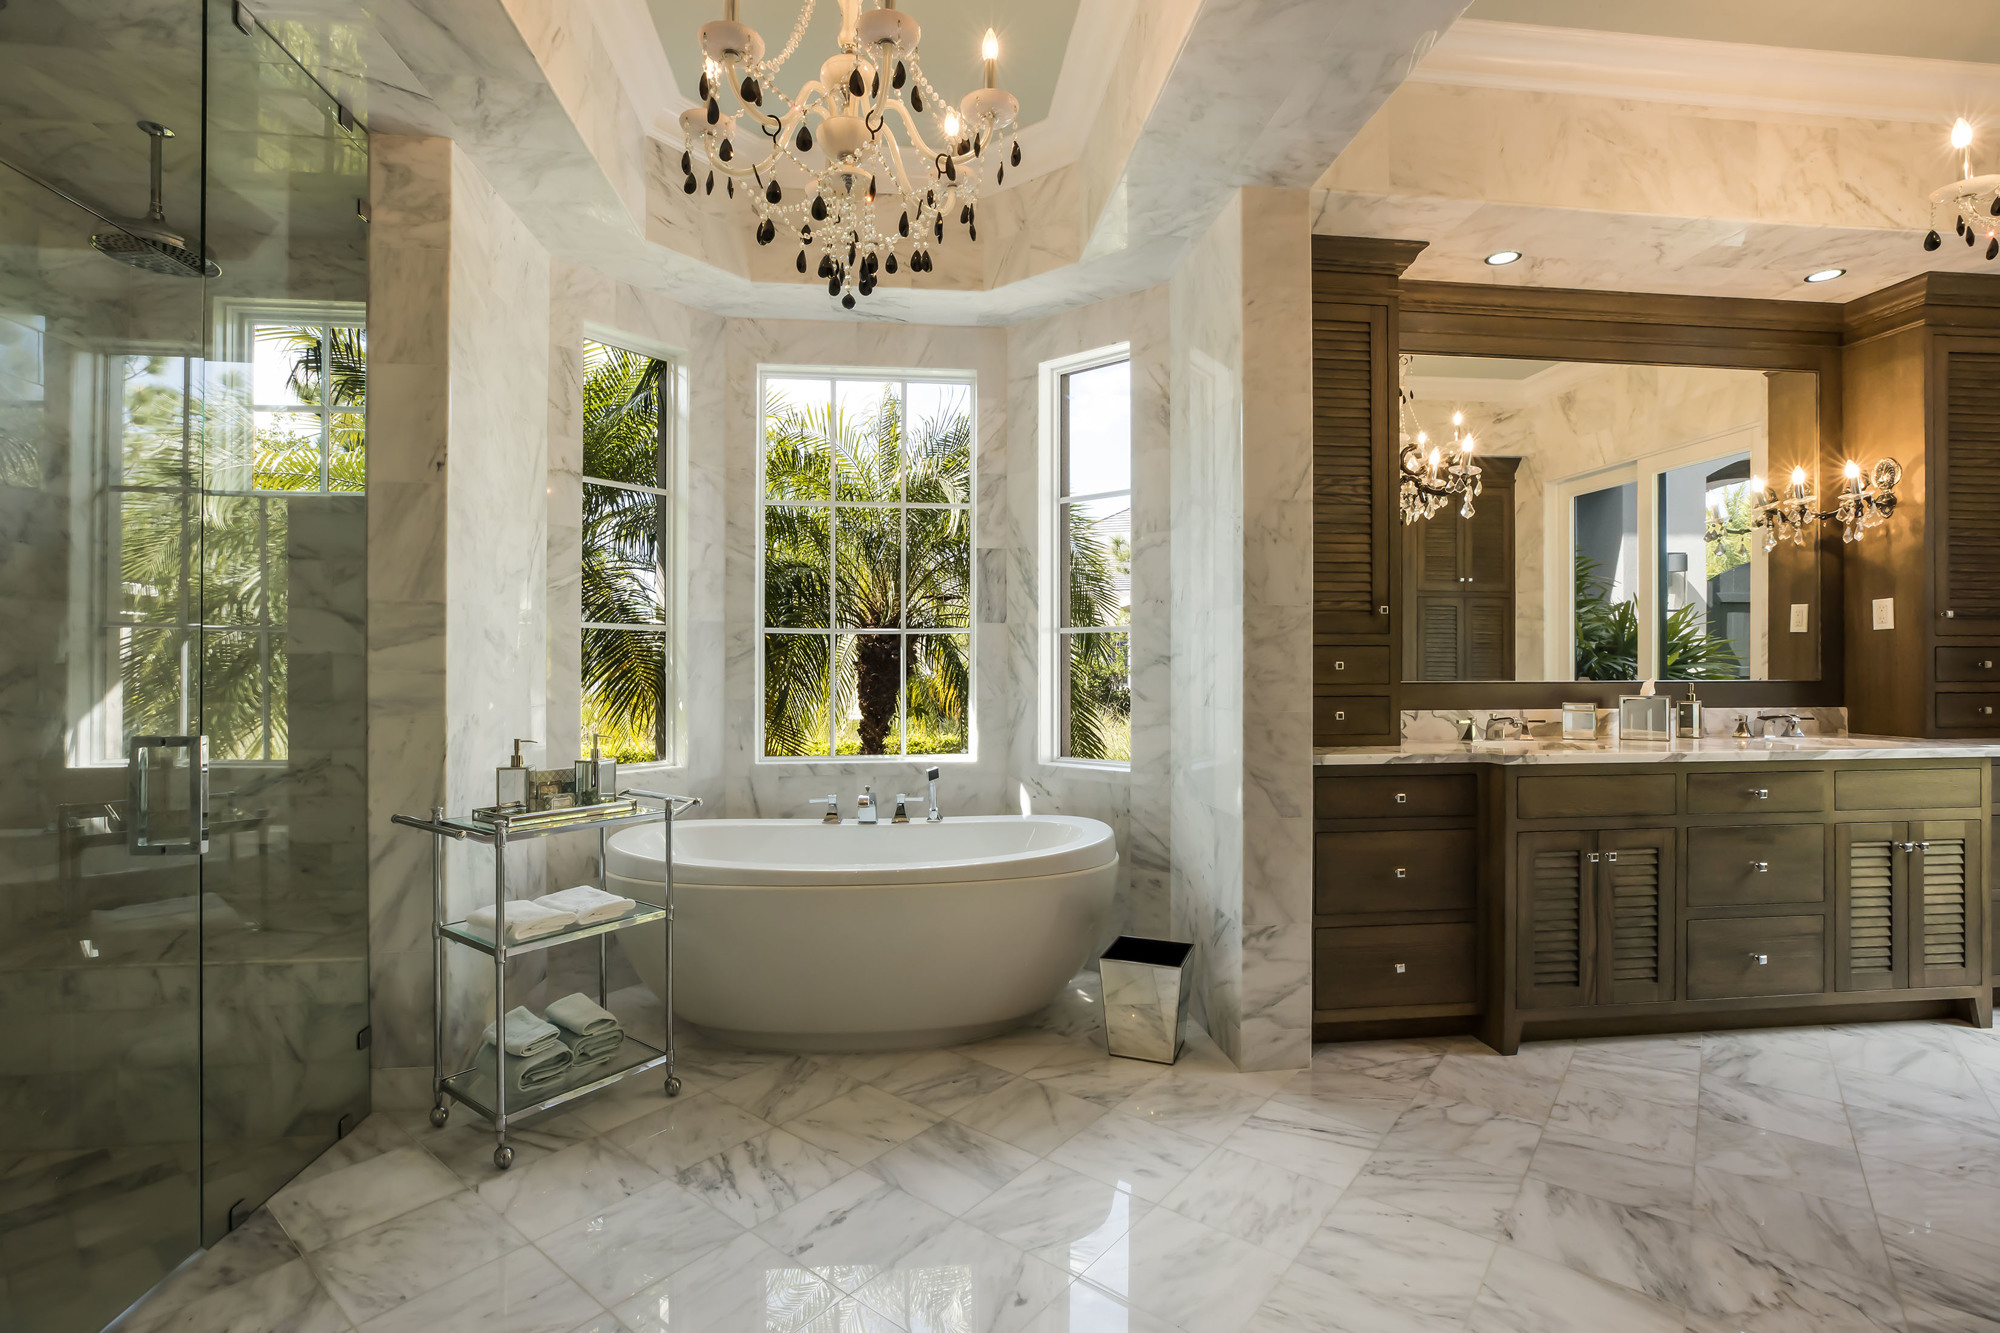 A glamorous marble-clad bathroom worthy of a luxury hotel adds a note of elegance to the master suite.